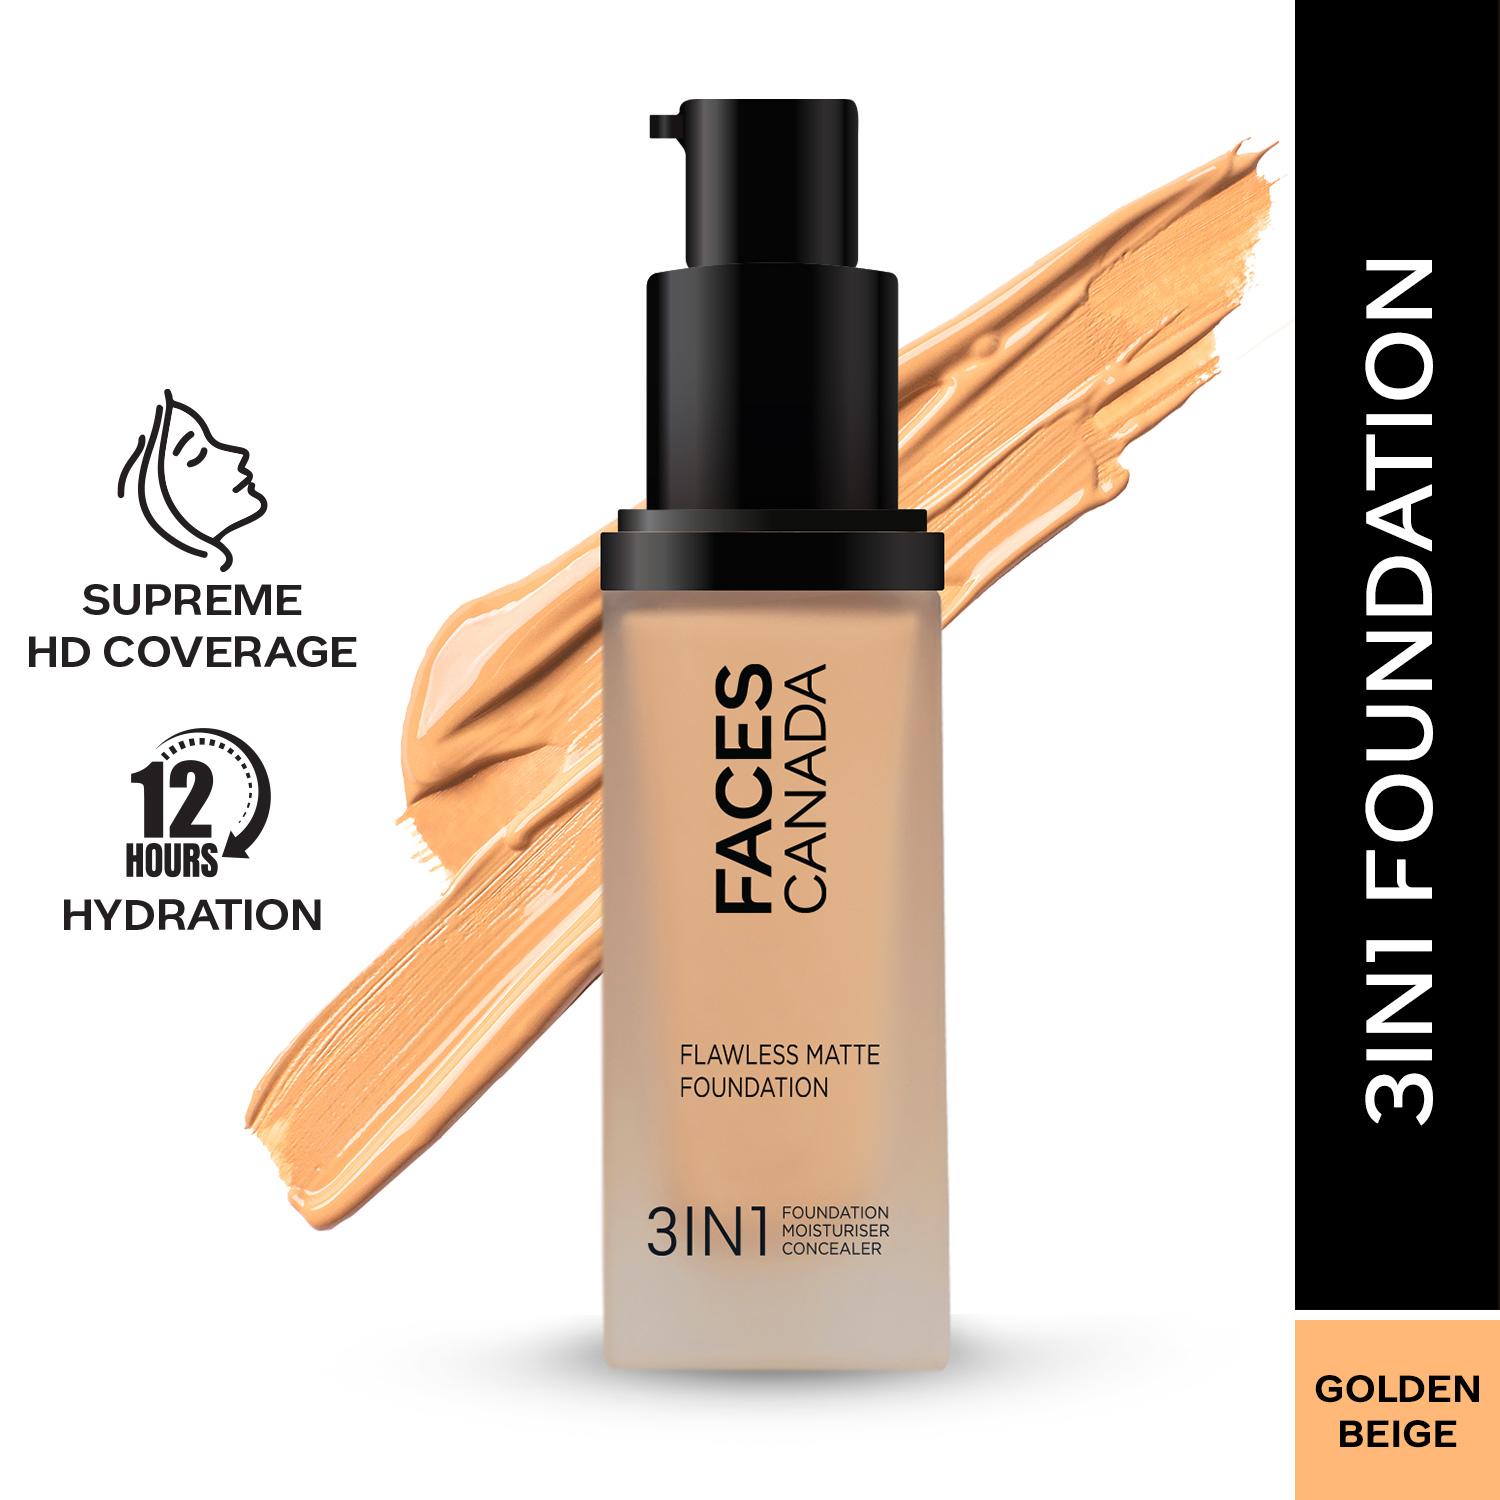 Faces Canada | Faces Canada 3-In-1 Flawless Matte Foundation SPF 18 - 032 Golden Beige (30ml)